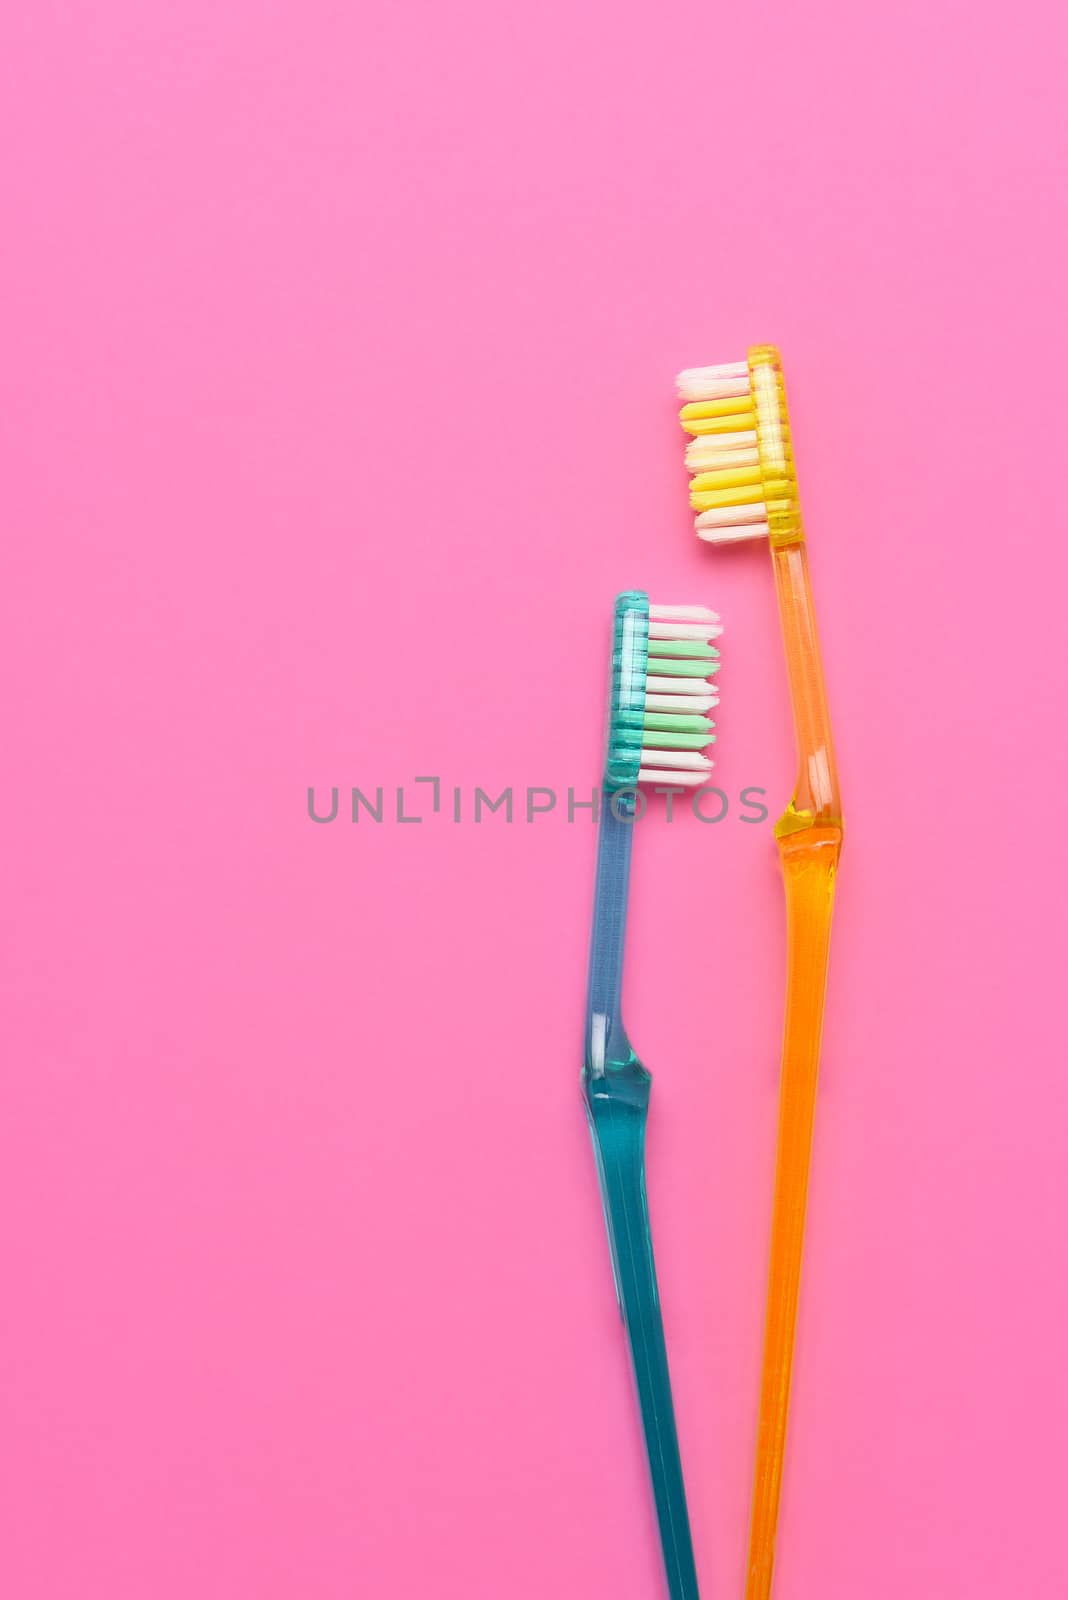 Two toothbrushes on a pink background by sCukrov